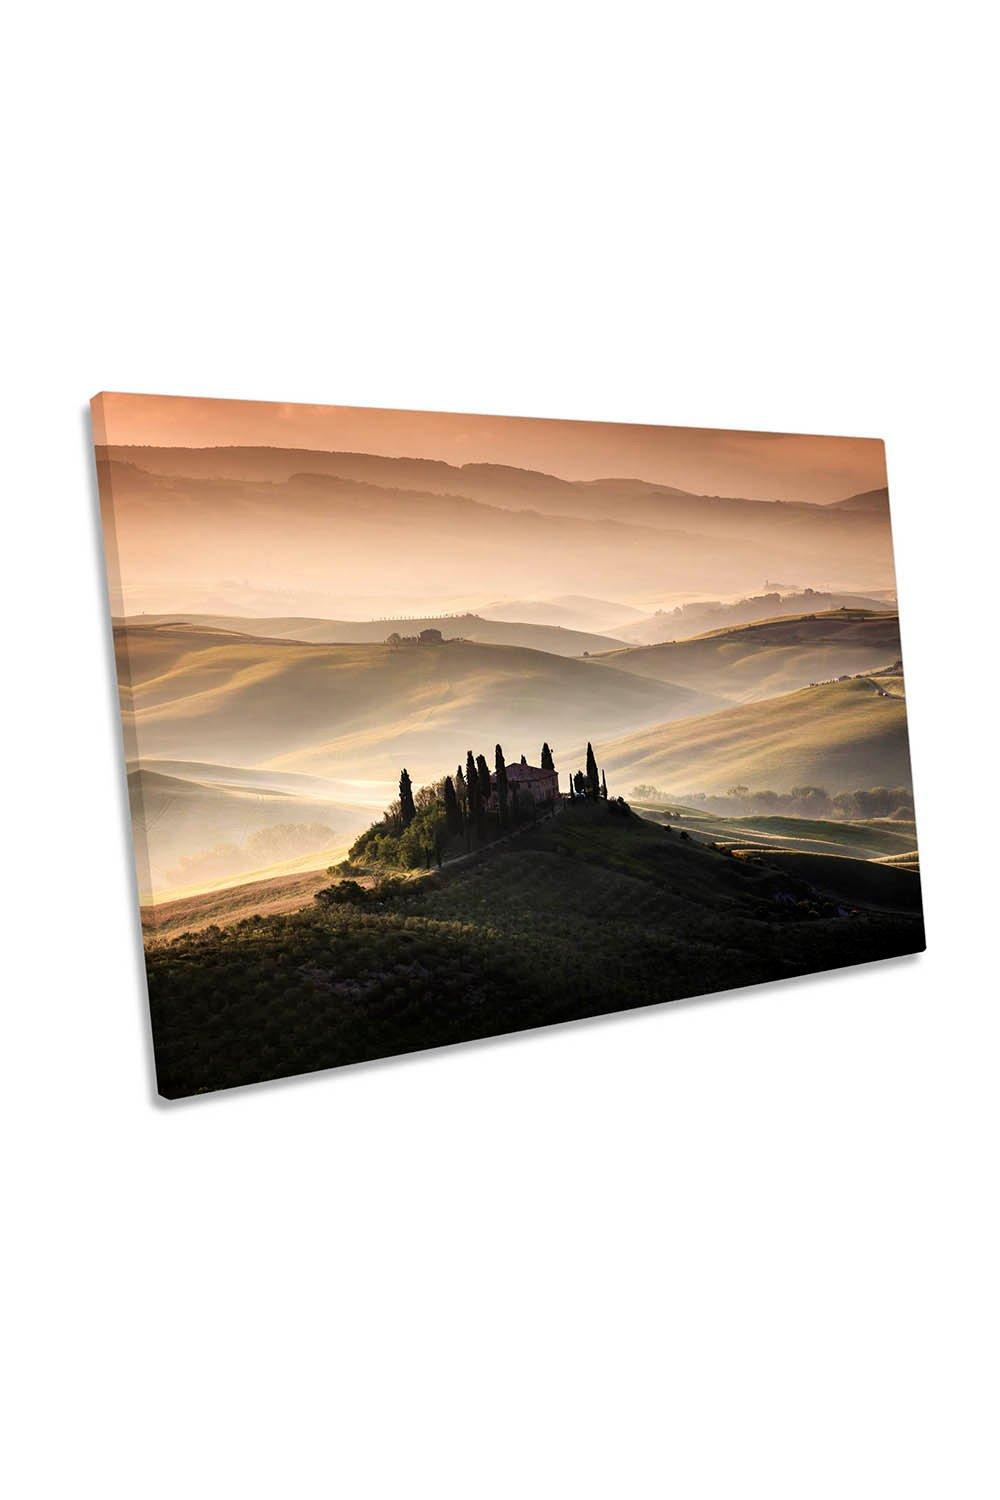 Tuscany Countryside Landscape Canvas Wall Art Picture Print